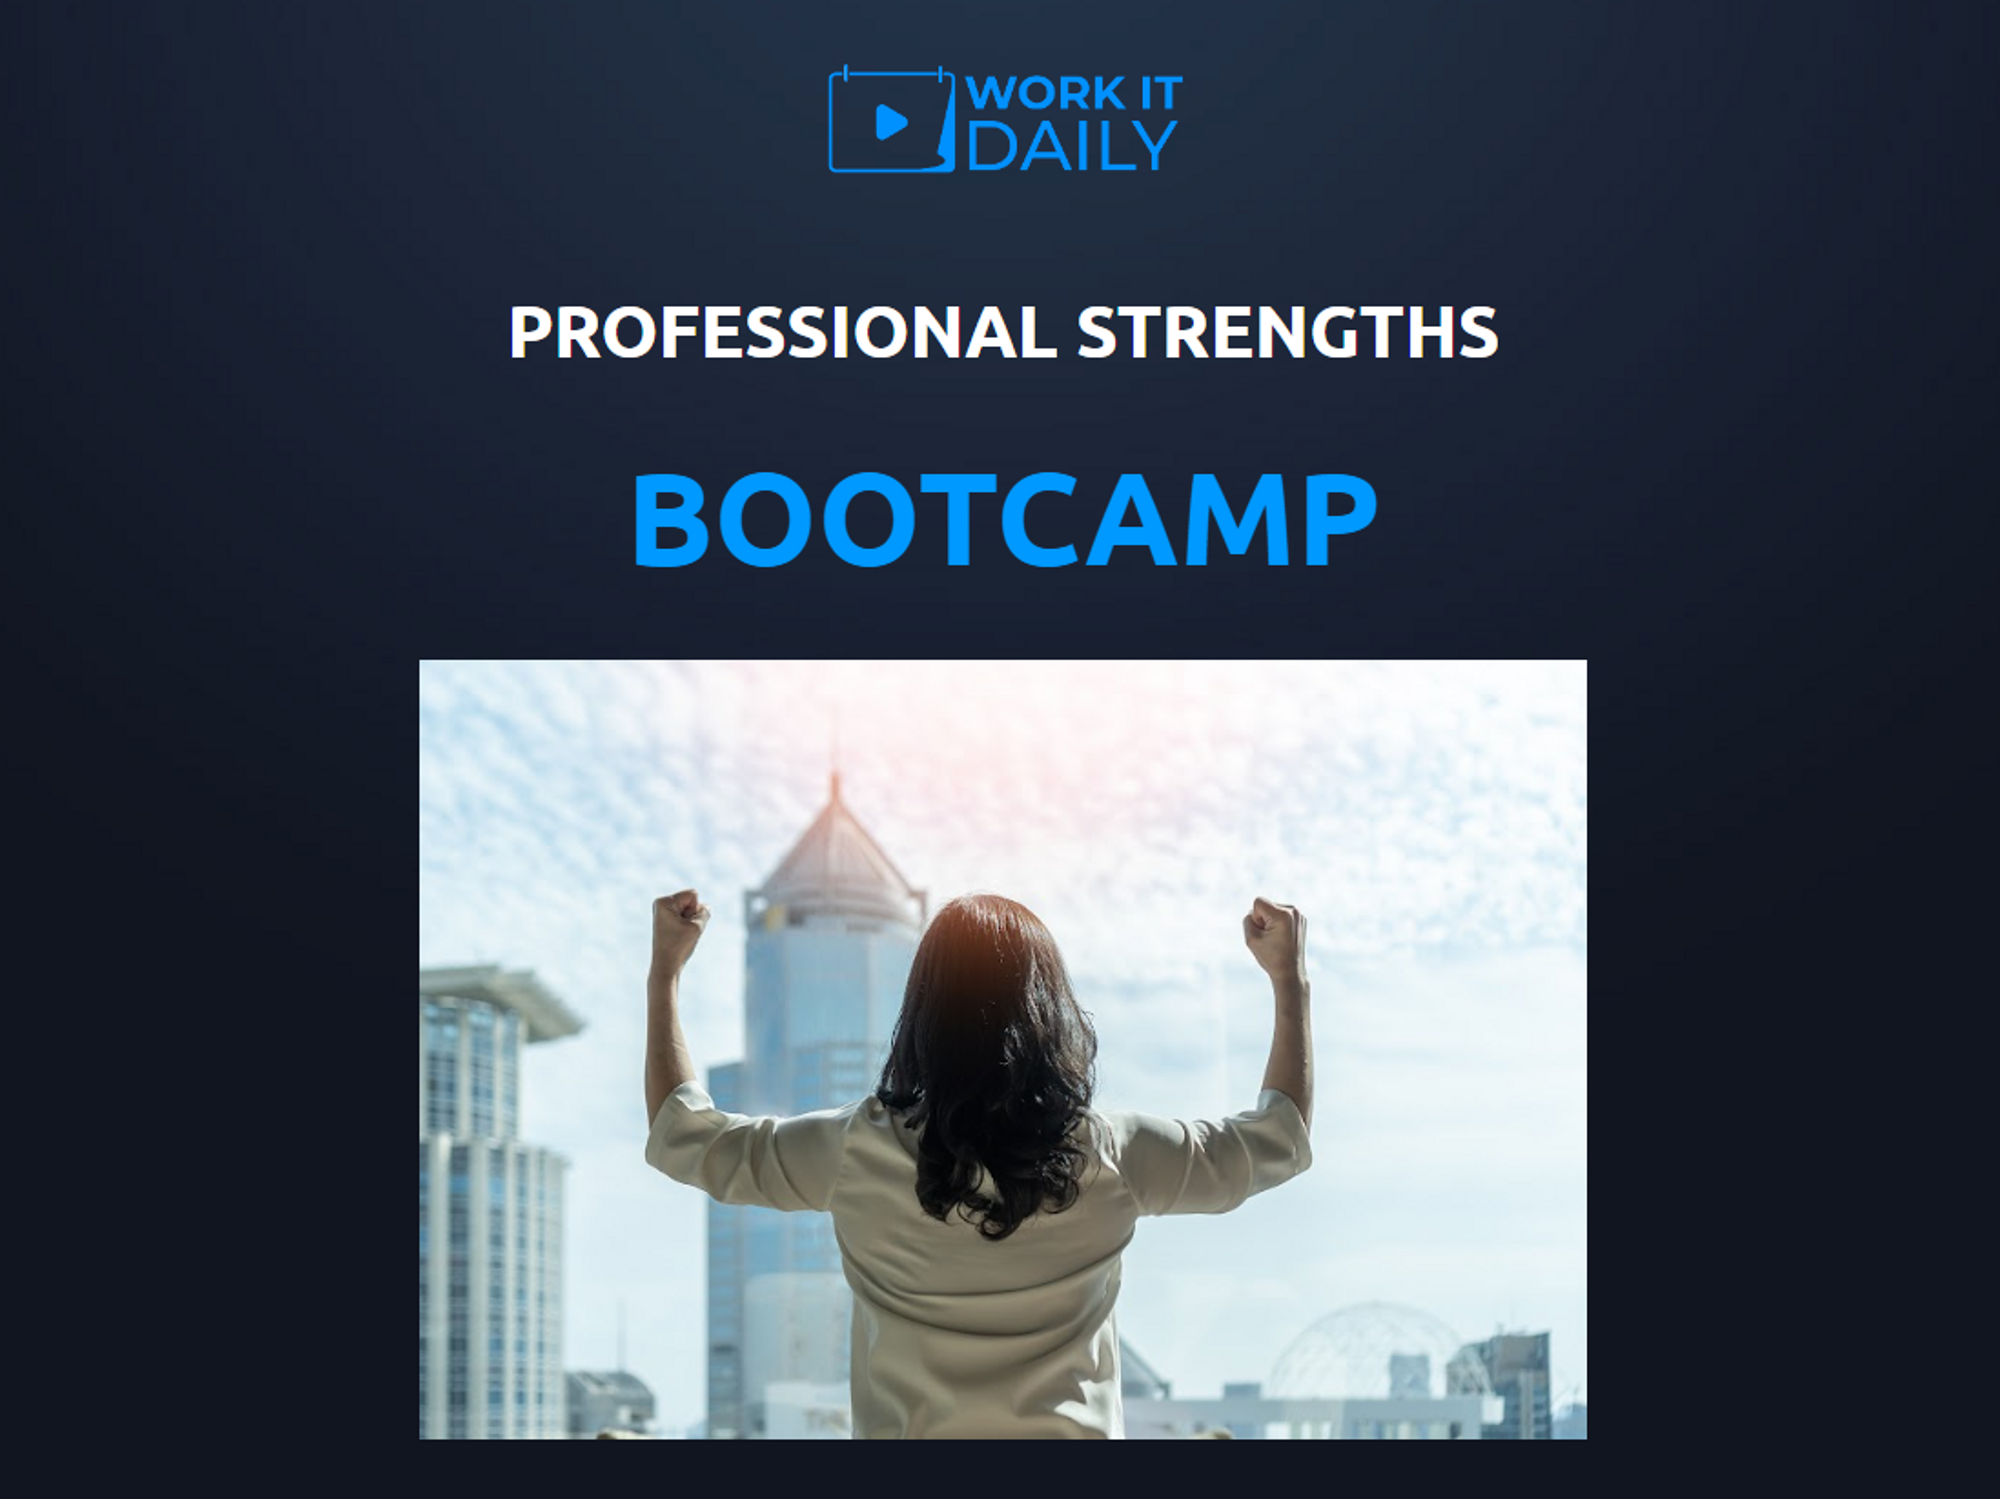 Work It Daily's Professional Strengths Bootcamp